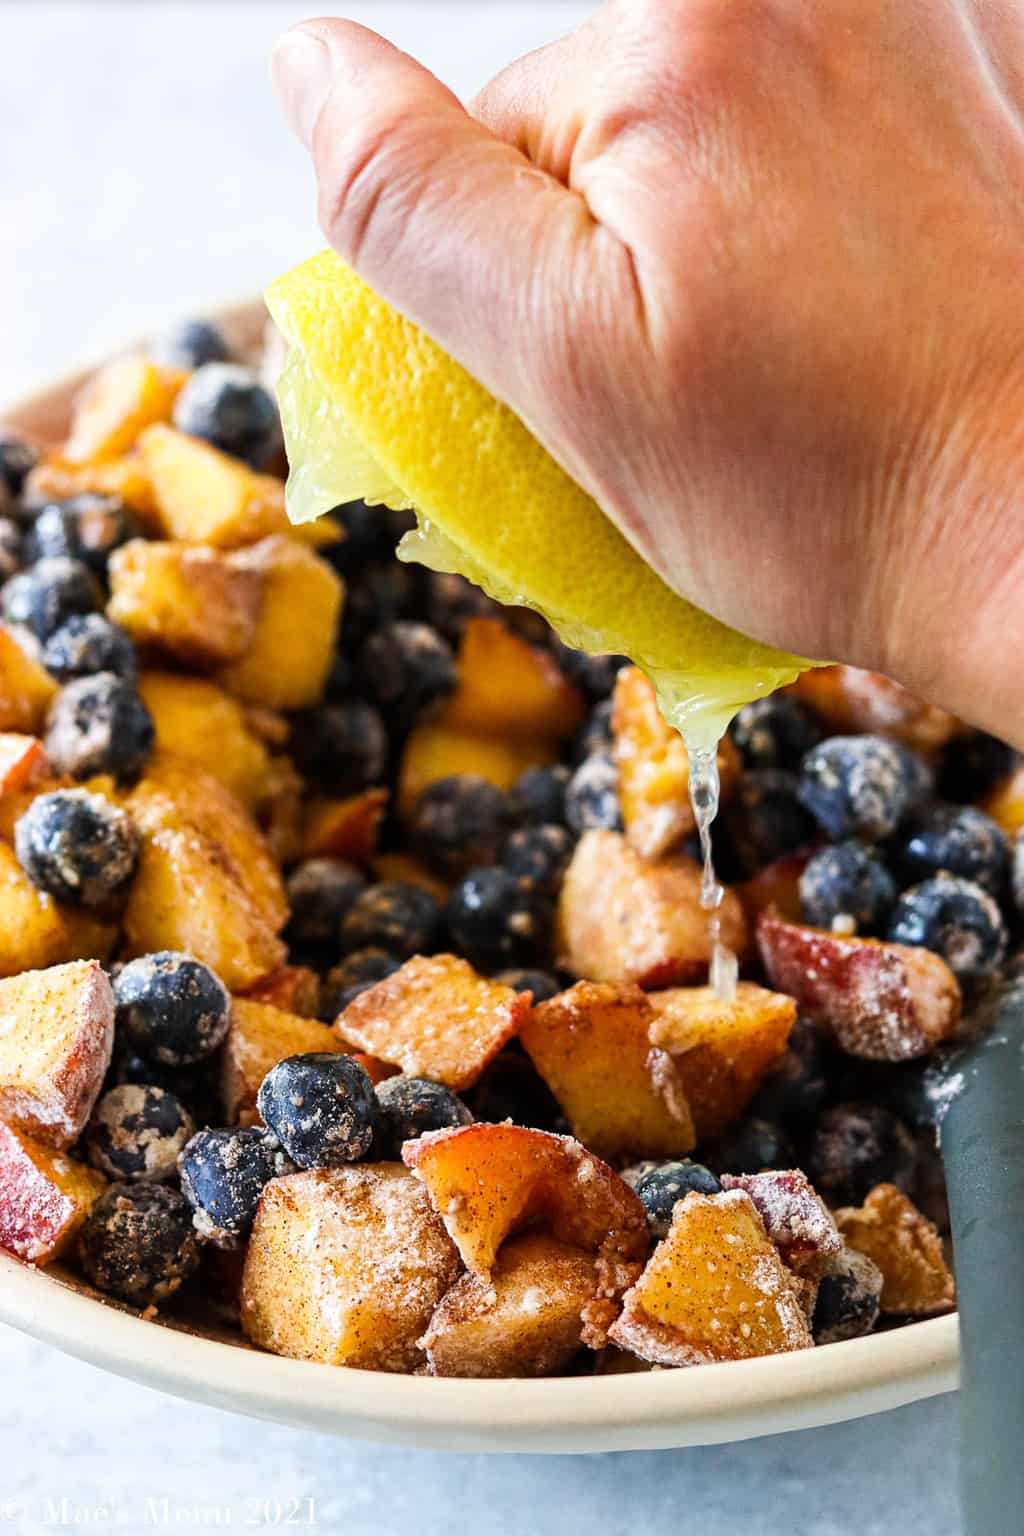 Squeezing lemon juice over a bowl of peaches and blueberries